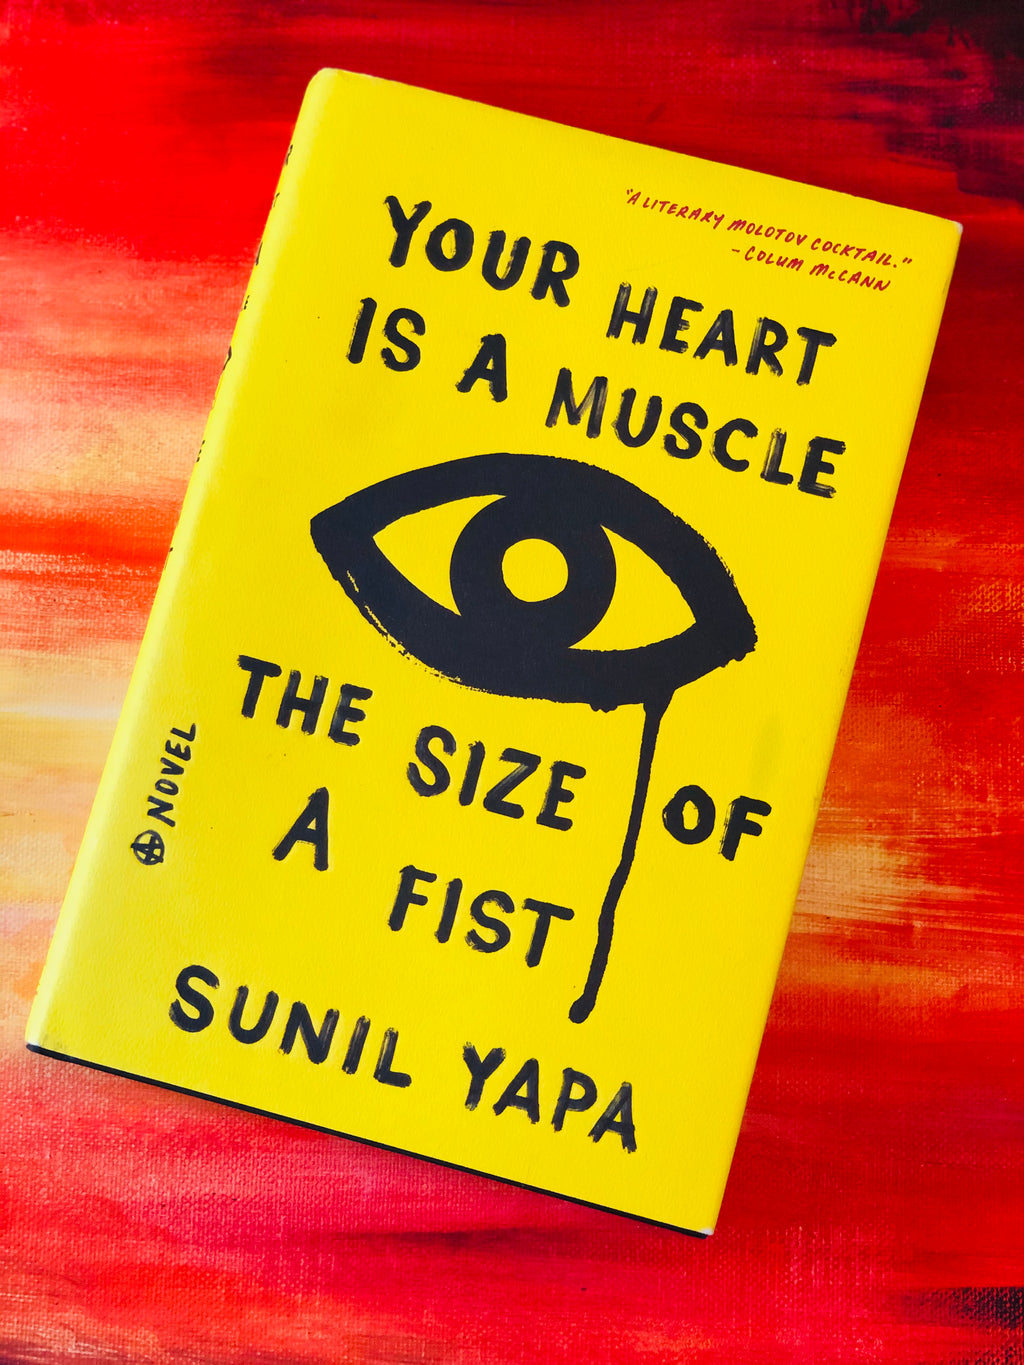 Your Heart is a Muscle the size of a Fist- By Sunil Yapa